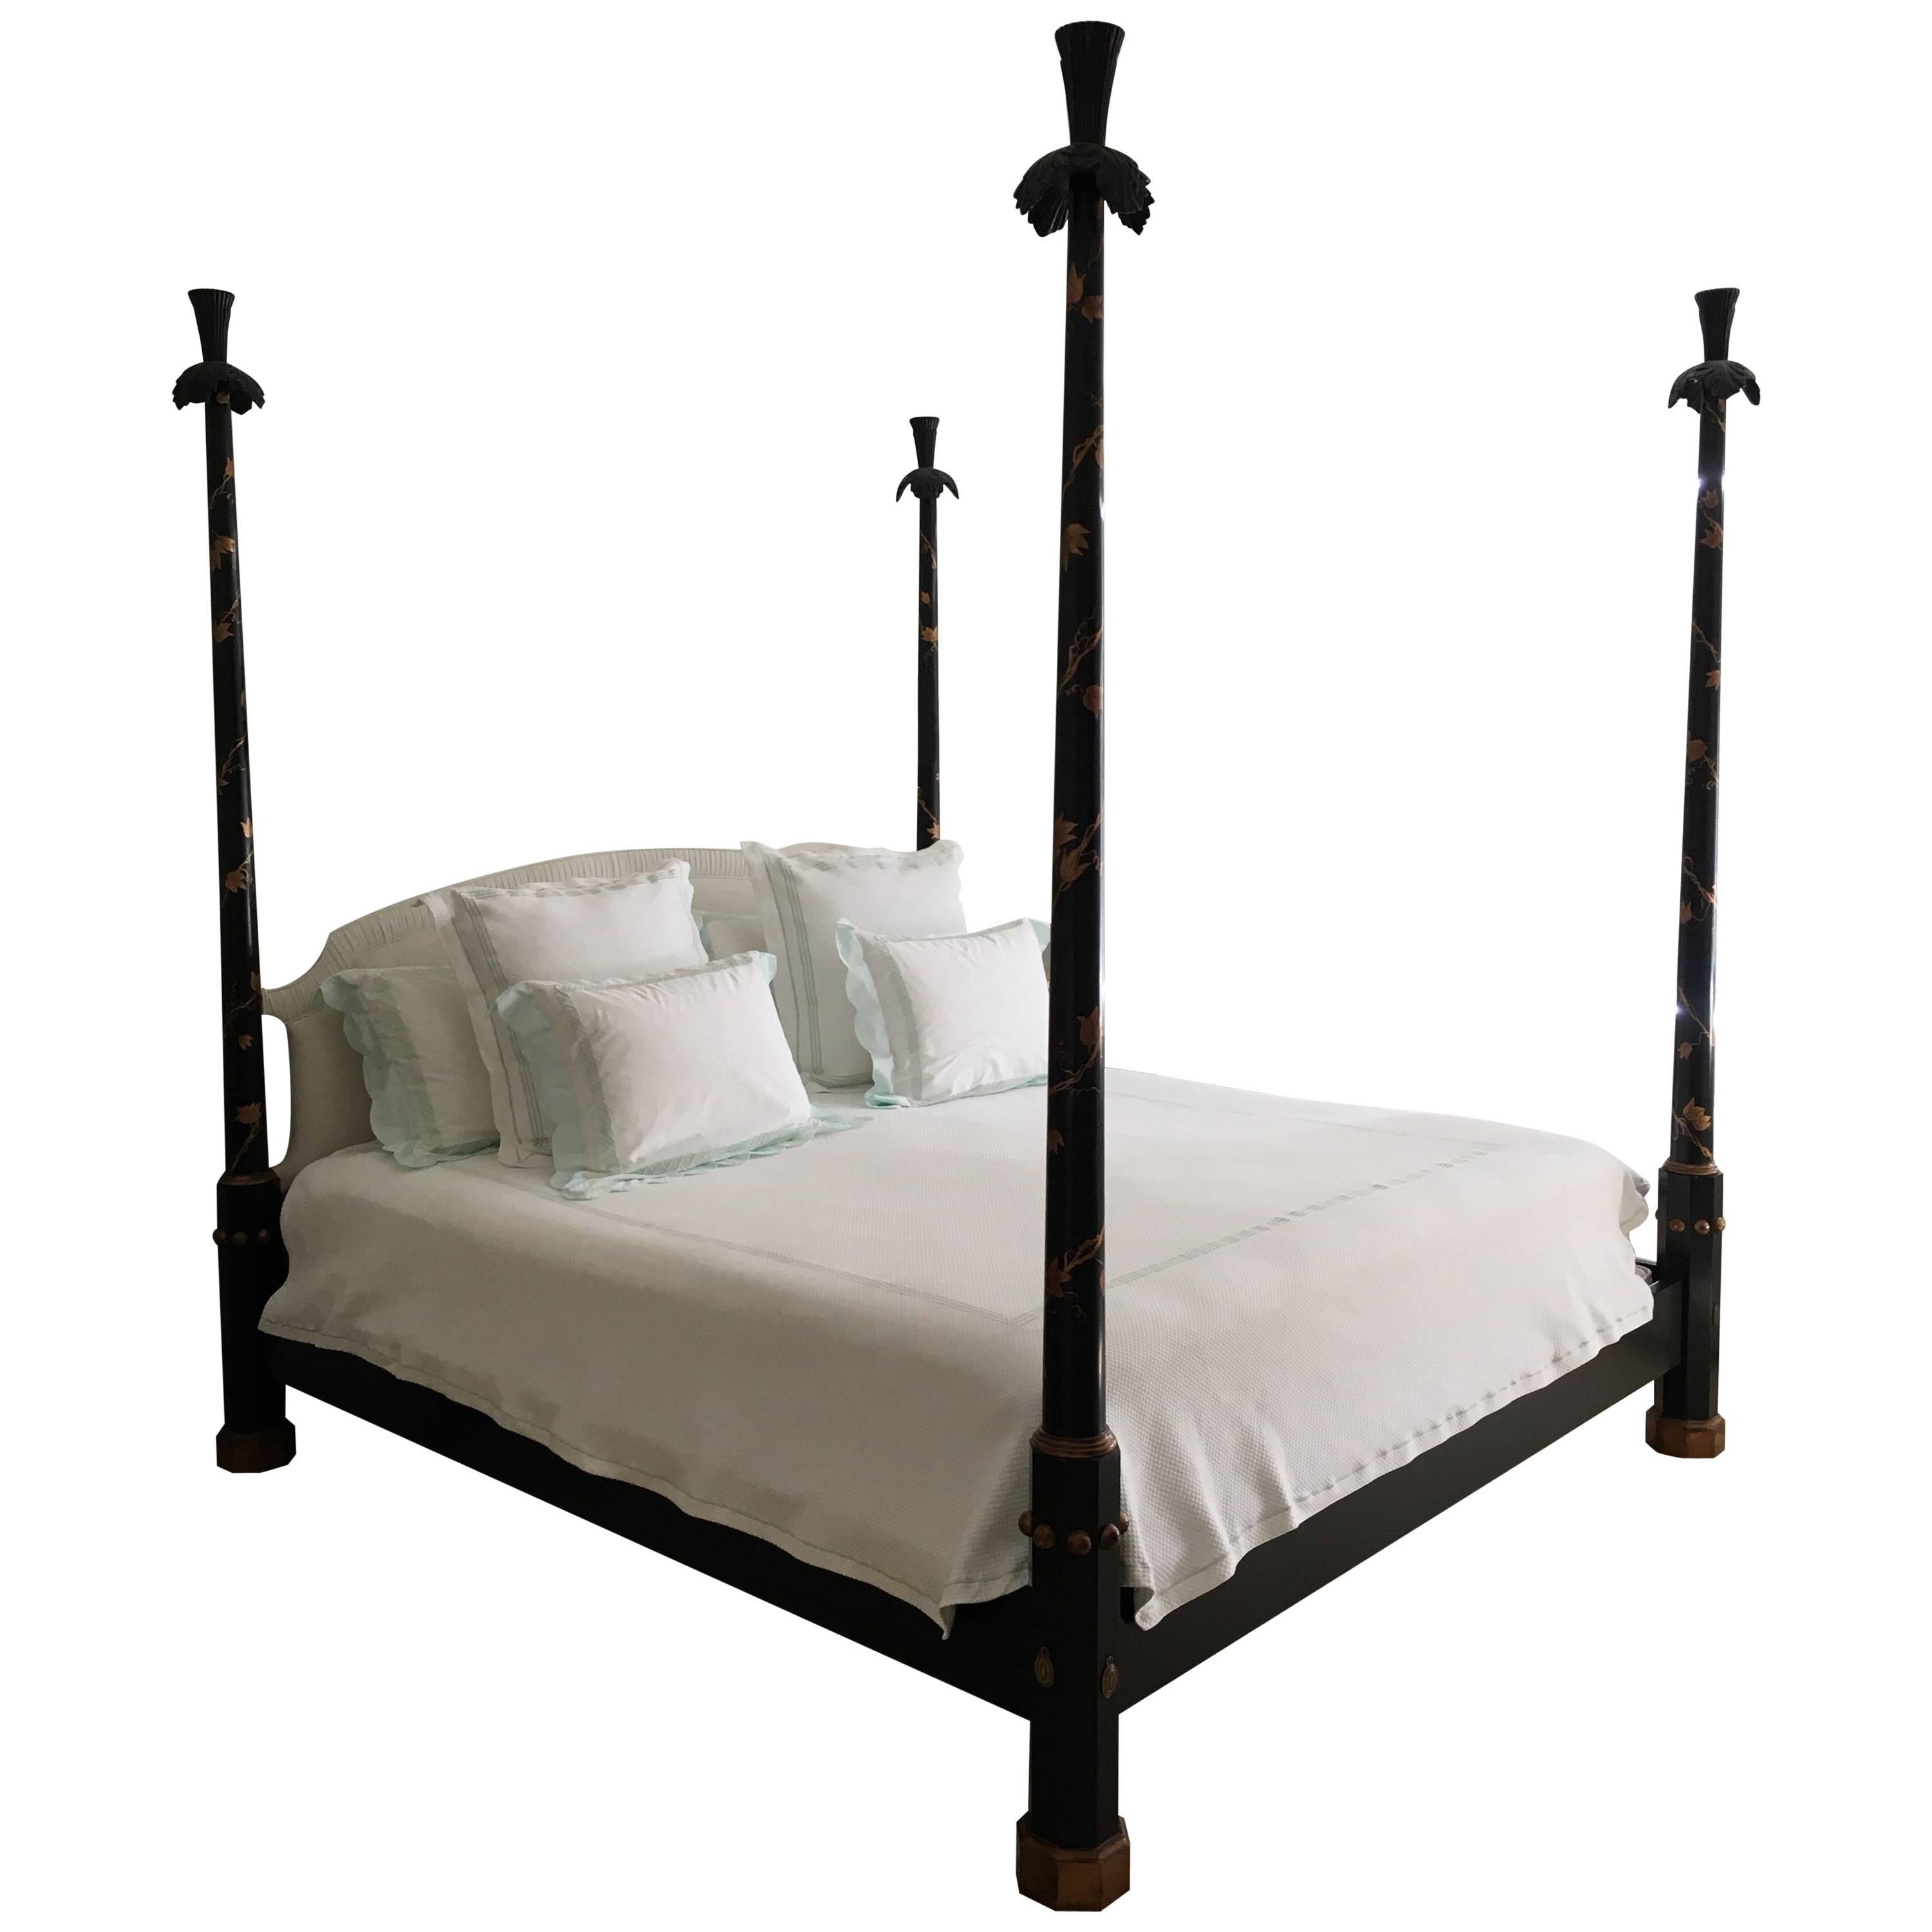 Tudor Style Four Poster Bed  King Size - Yola Gray Antiques & Interiors